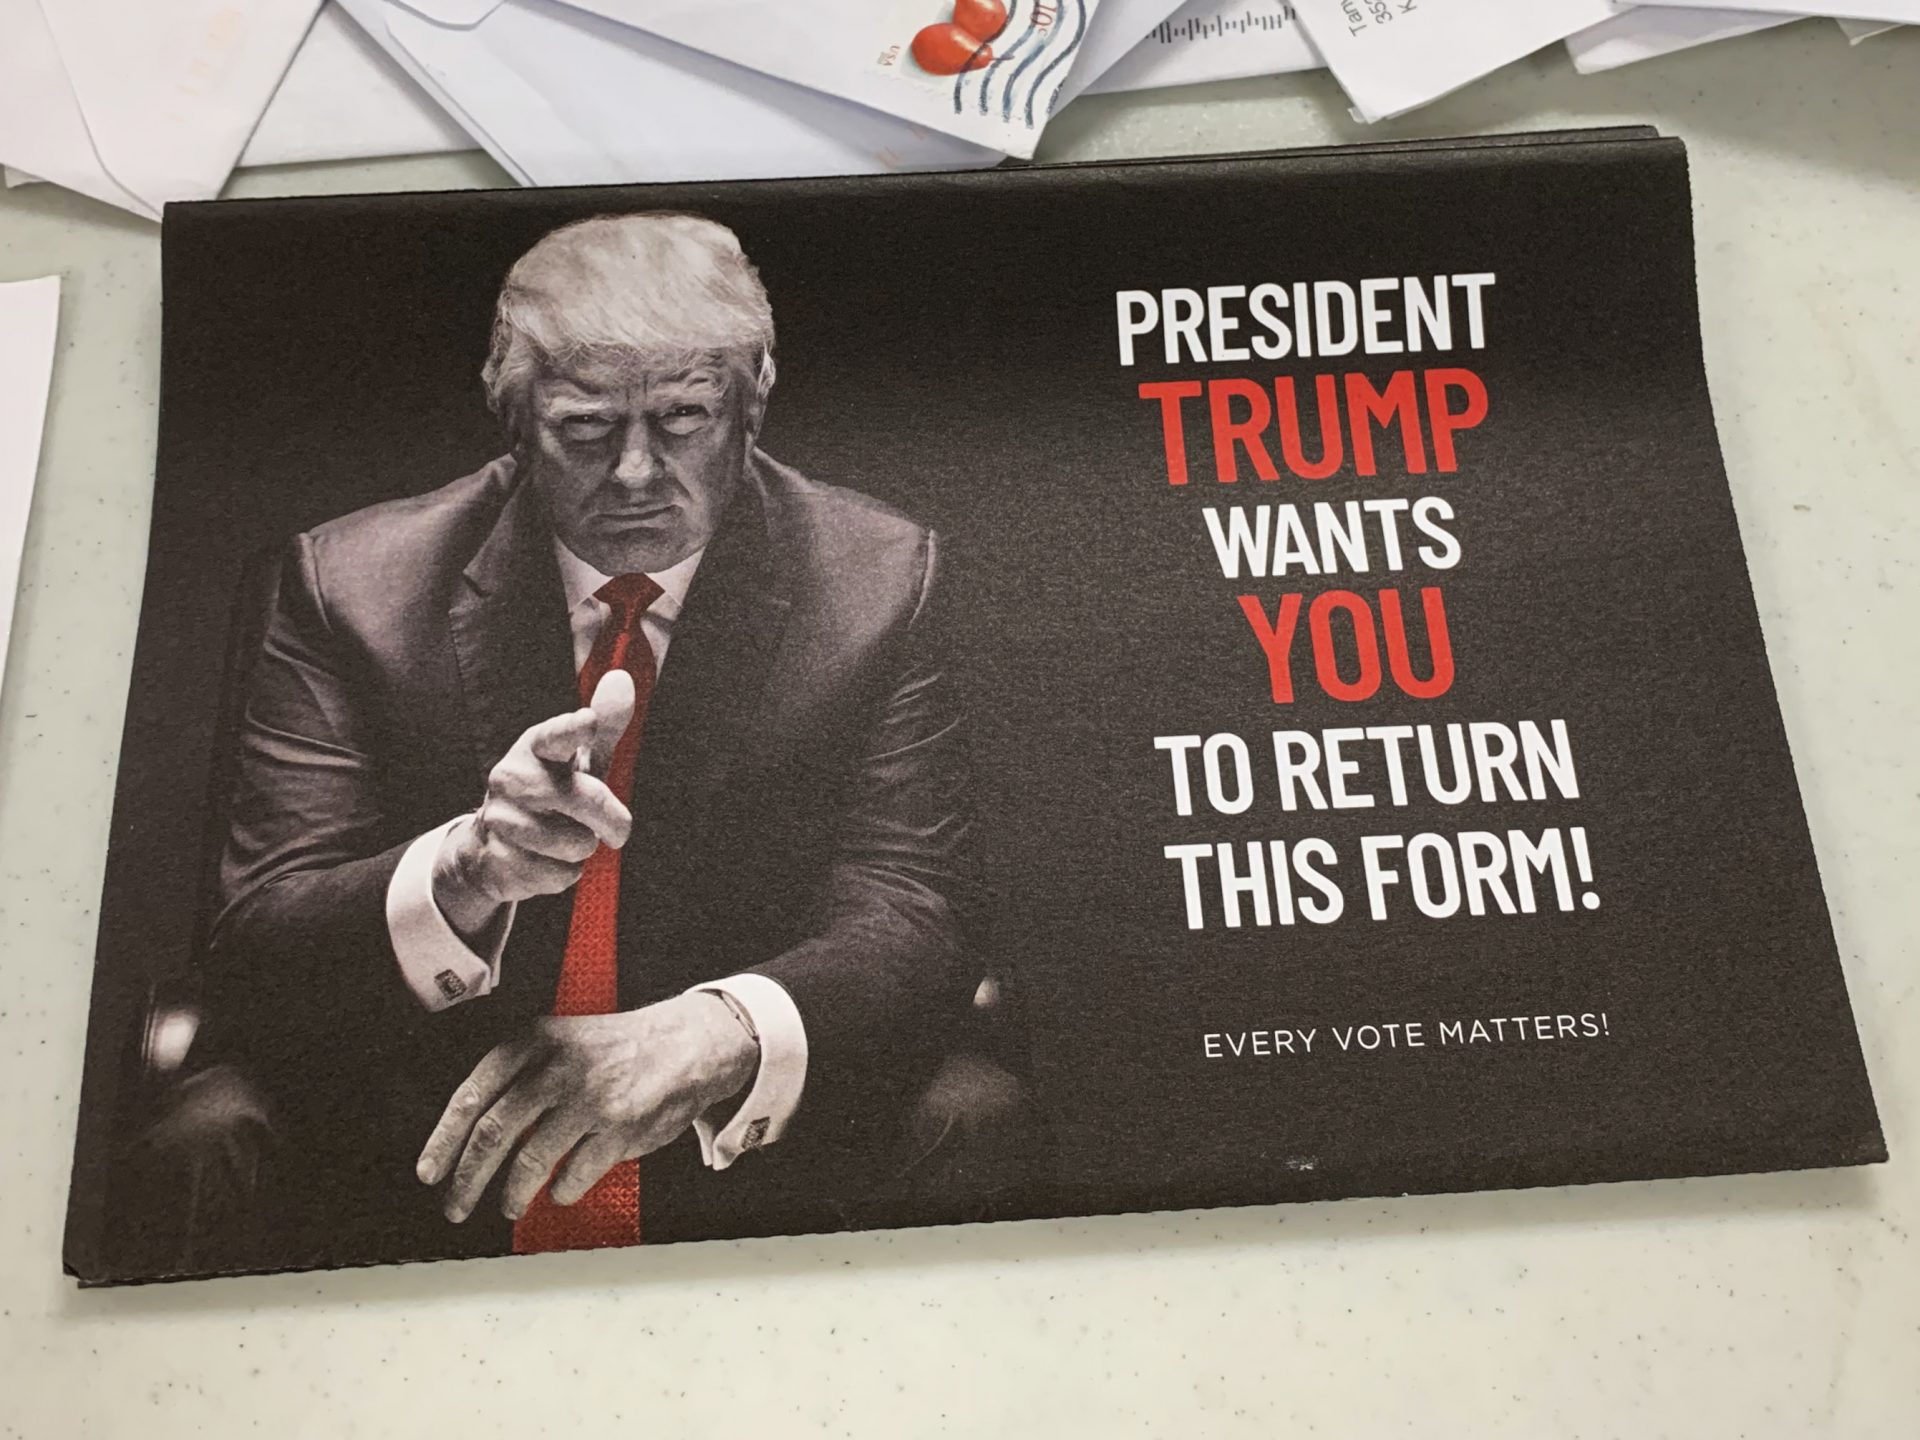 A mailer shows President Trump encouraging mail-in voting, despite his vocal opposition to it.